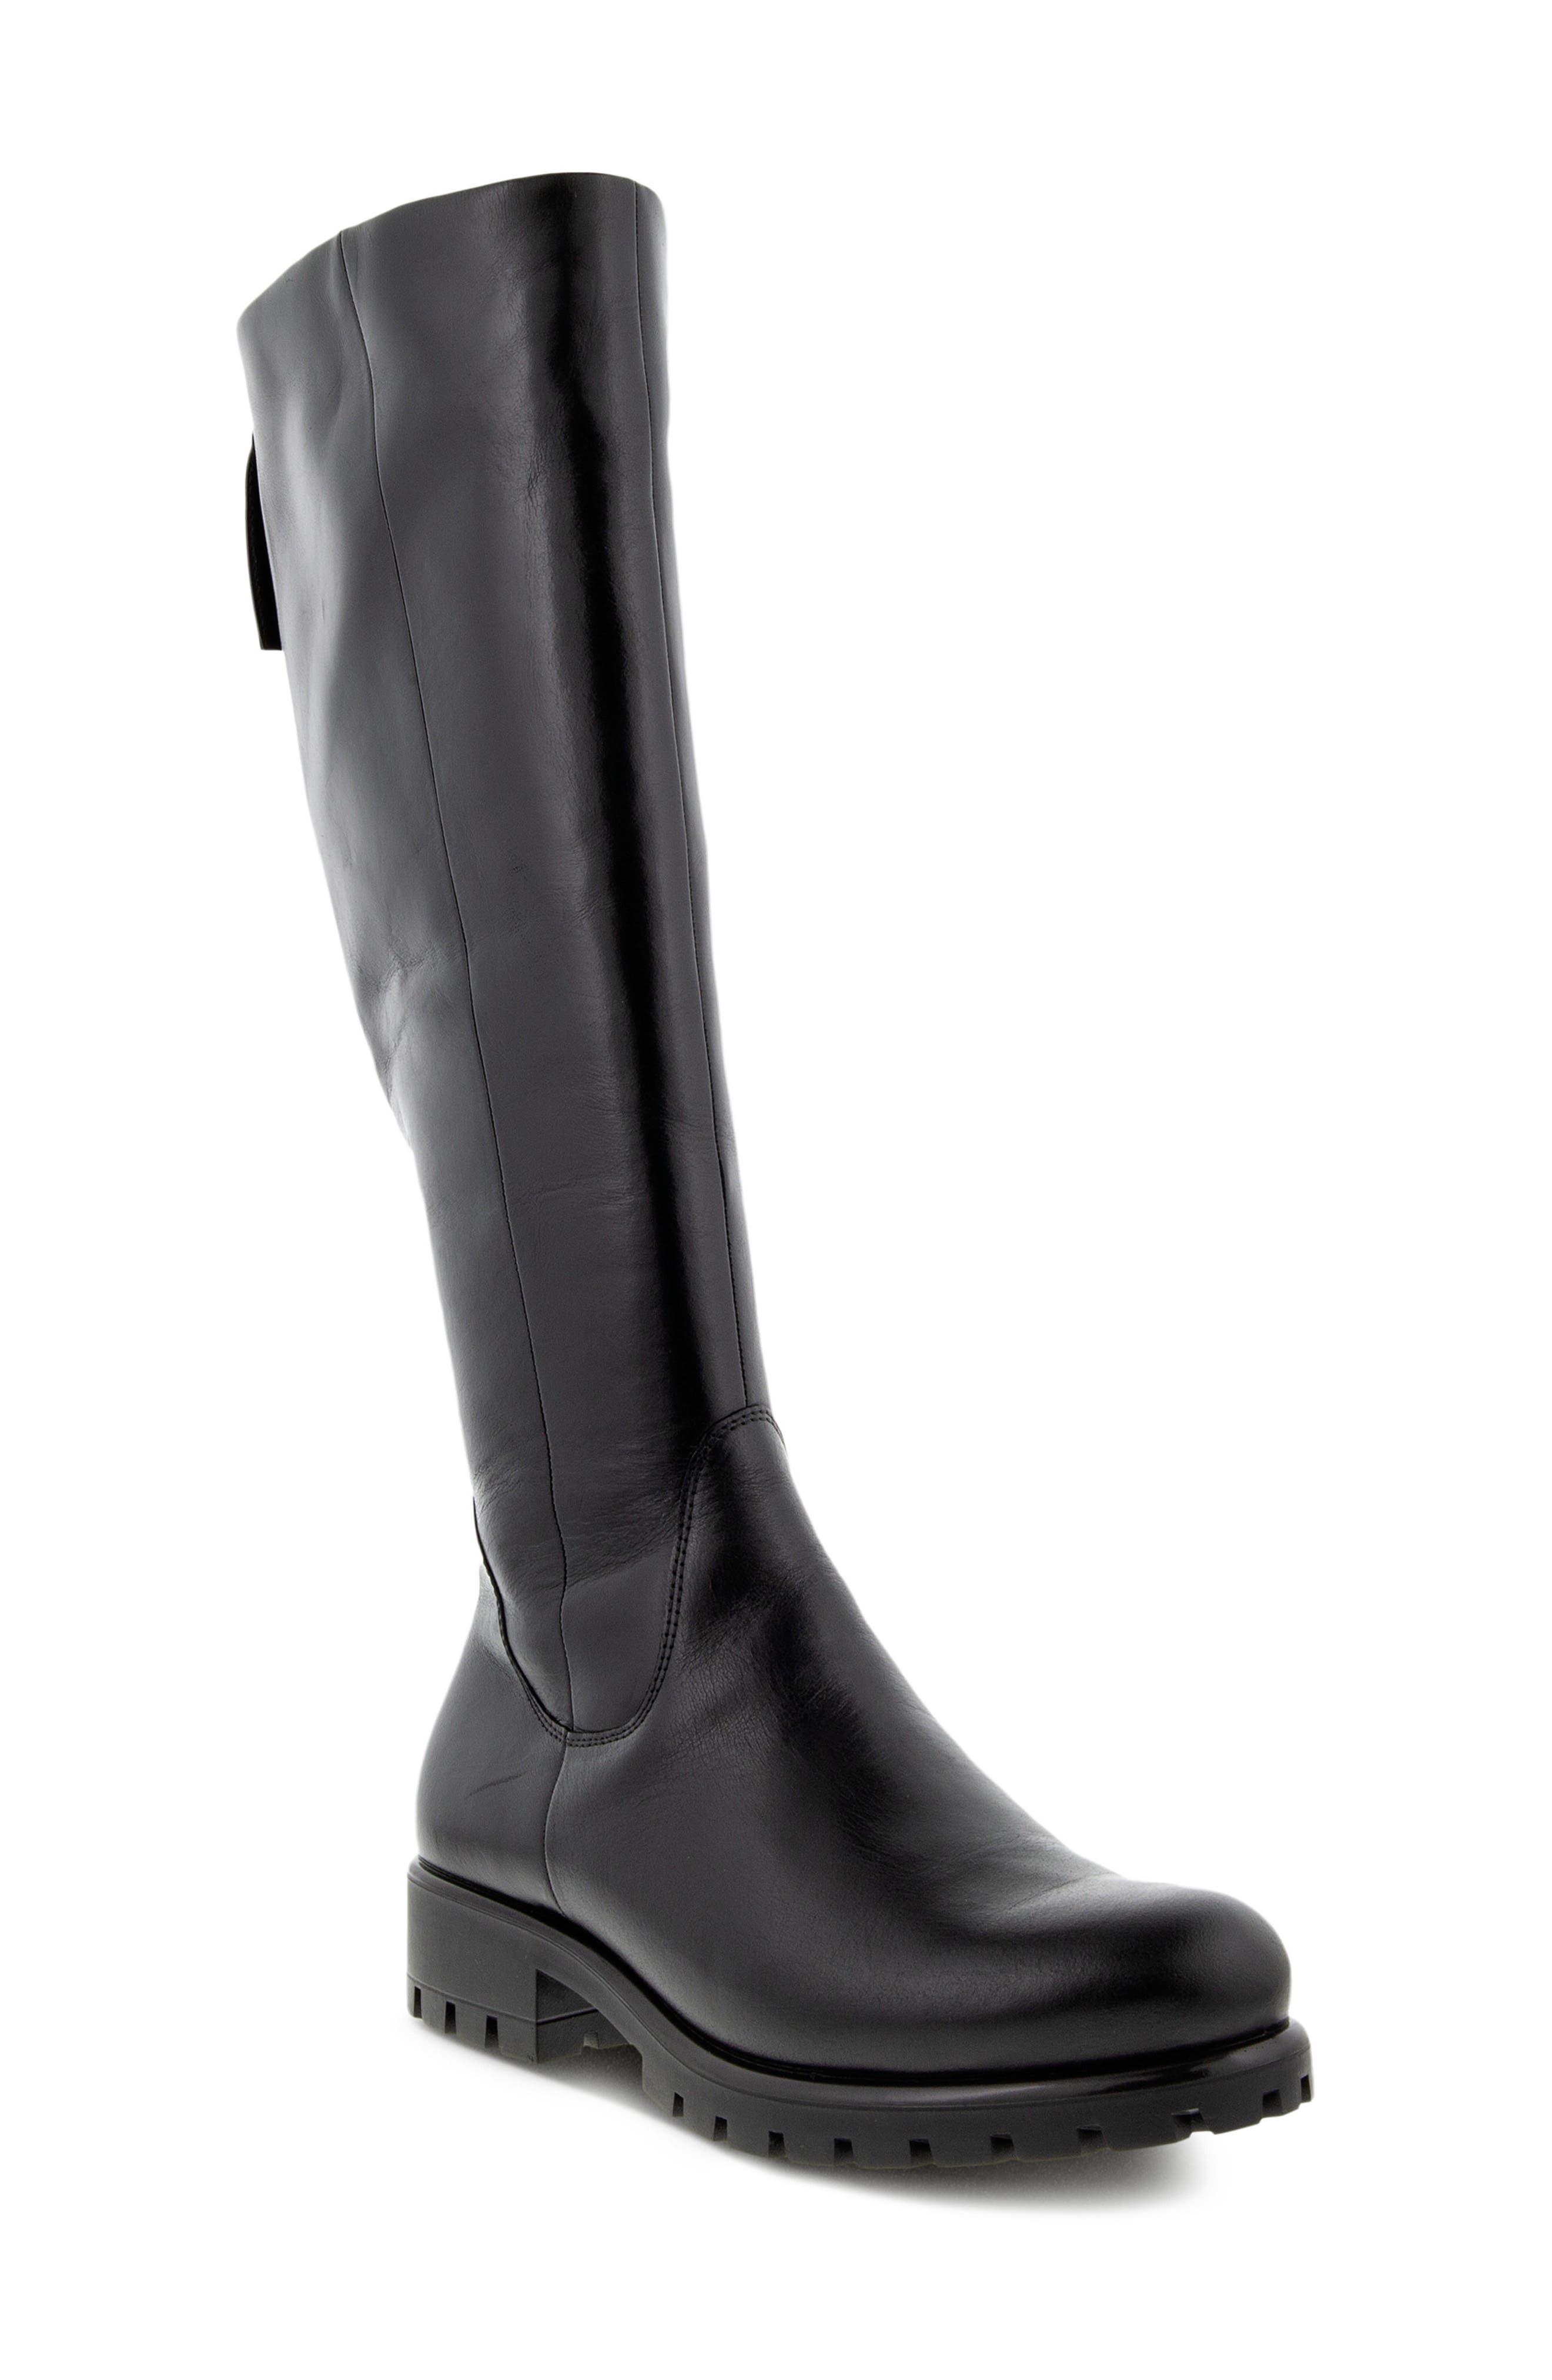 UPC 194890322387 product image for ECCO Modtray Knee High Boot in Black at Nordstrom, Size 7-7.5Us | upcitemdb.com